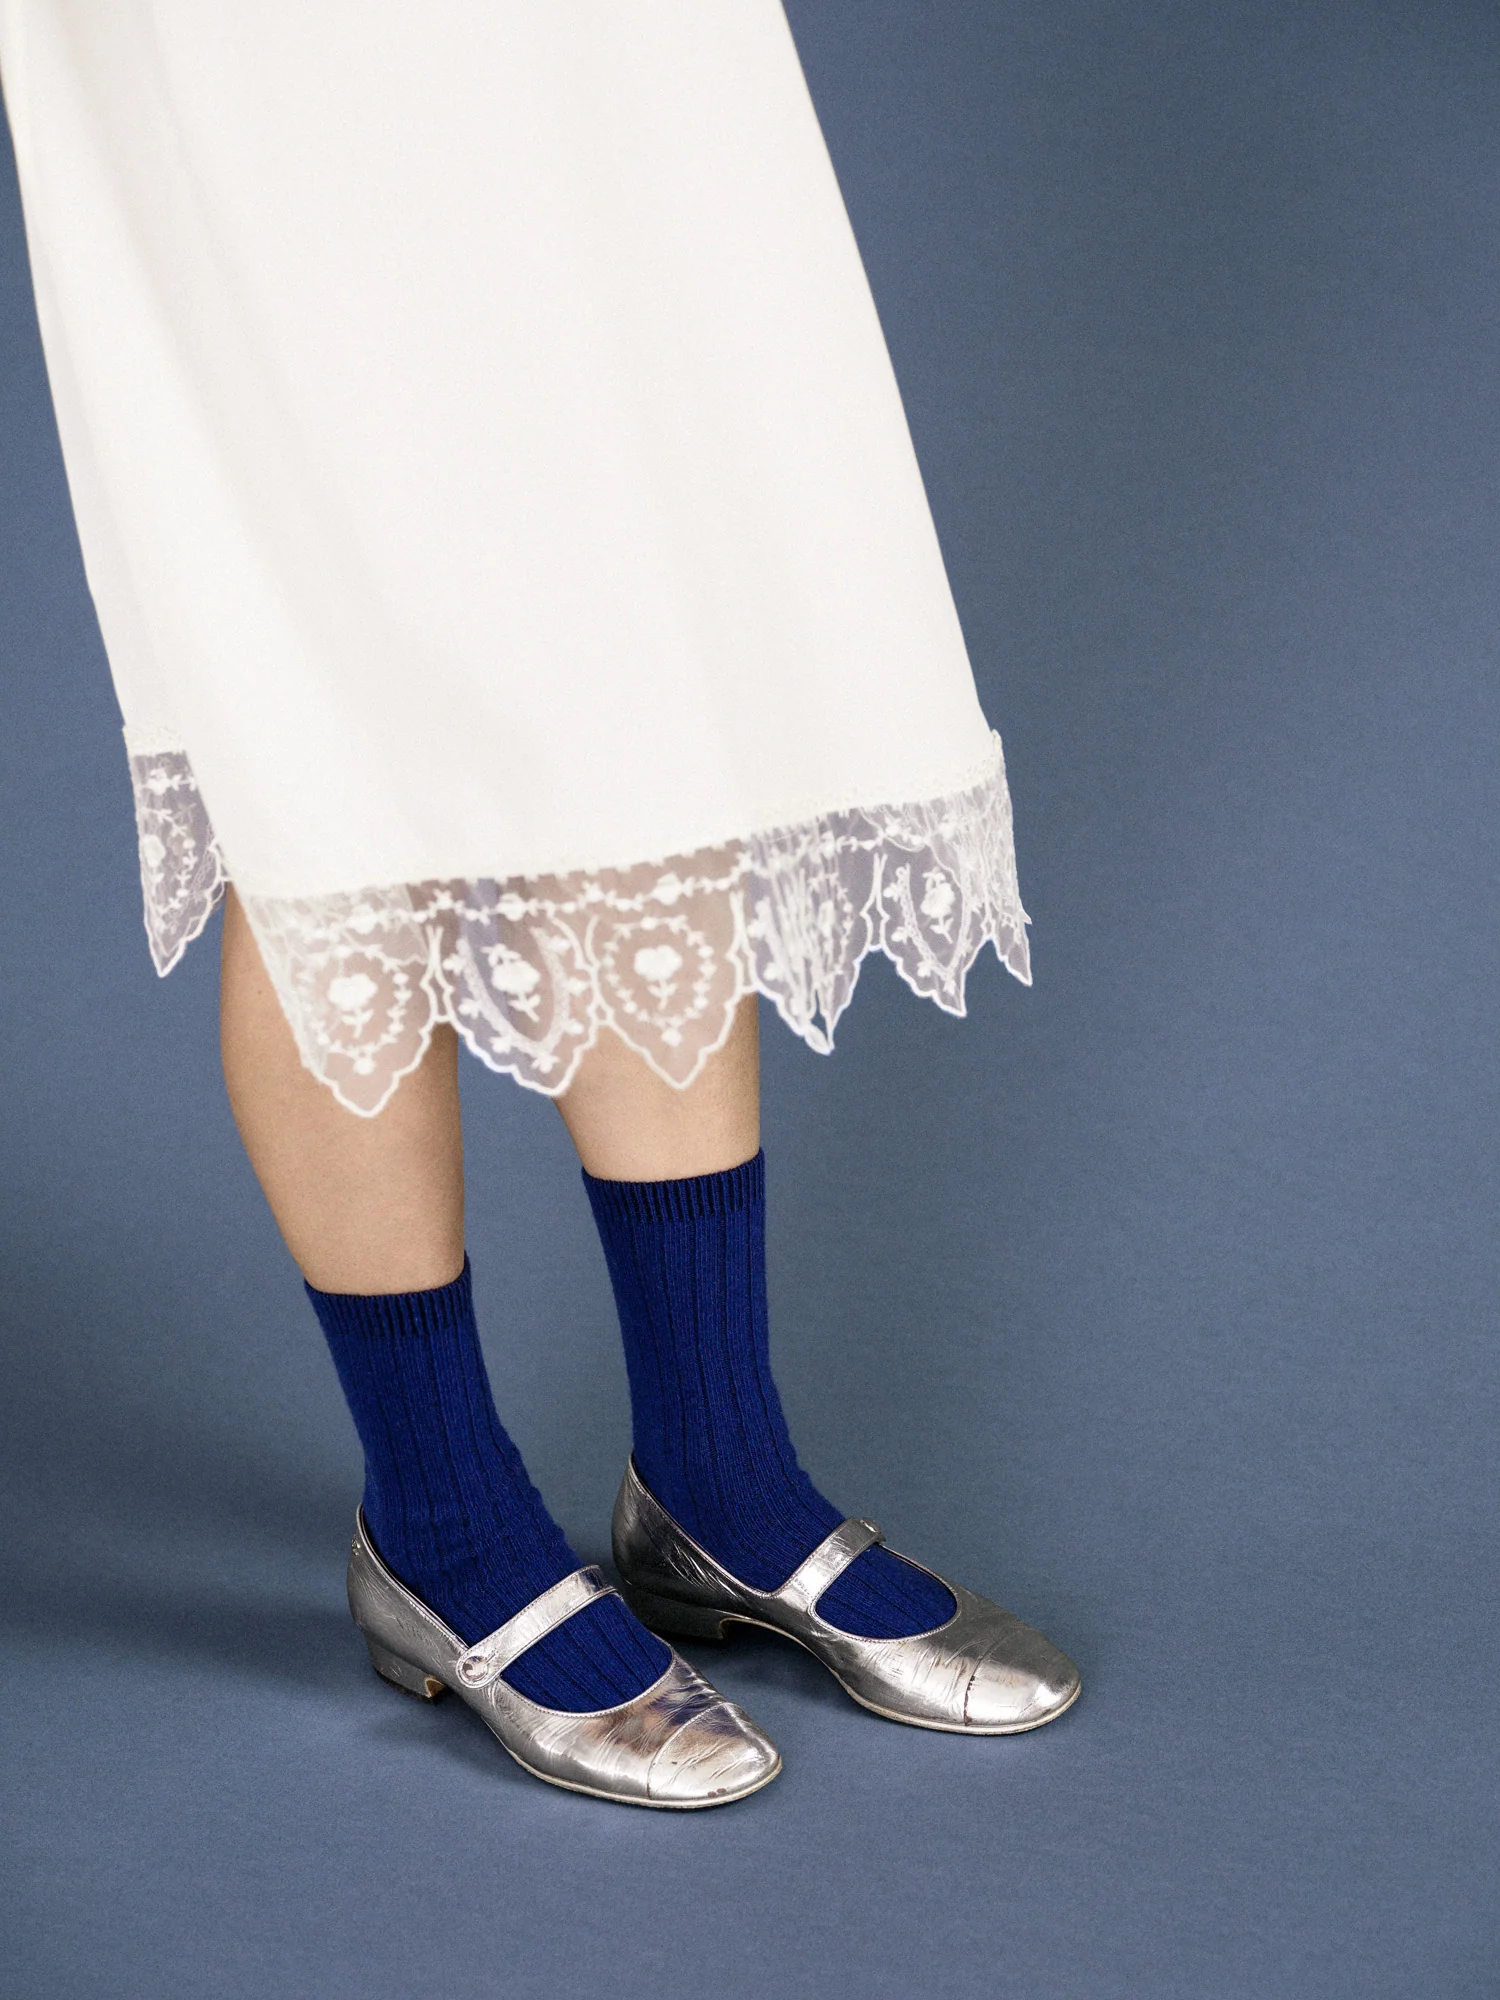 blue socks pair with a fun skirt and metallic silver shoes. 